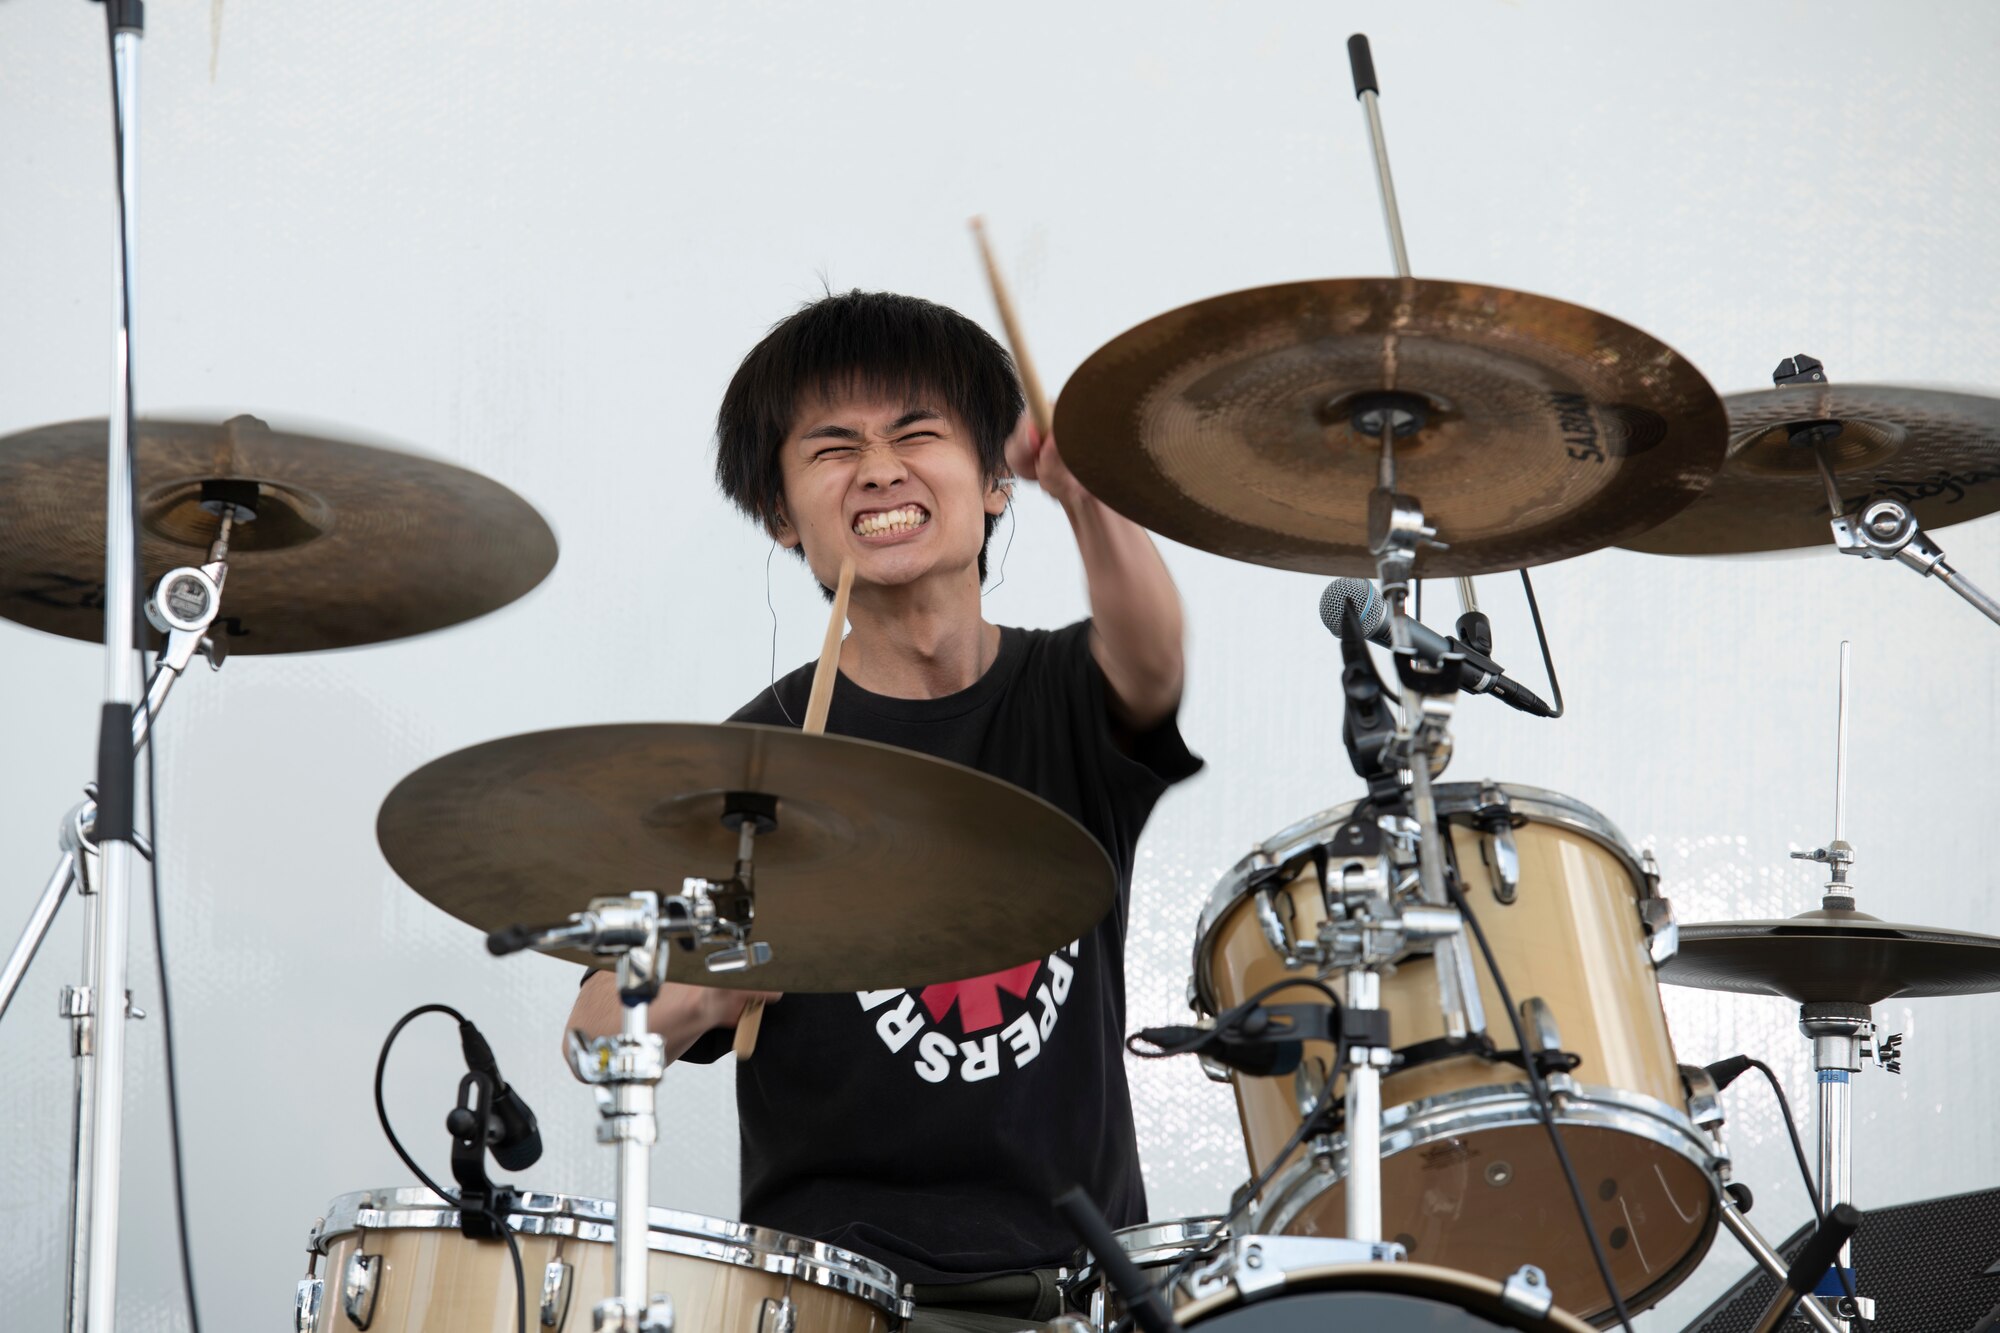 A drummer performs during Friendship Festival 2022, at Yokota Air Base, Japan, May 22. The two-day festival was an opportunity for visitors to learn more about the U.S. and Japan bilateral partnership, while strengthening the bonds between Yokota and the local communities. Yokota was able to host the event with the support of Japan Self-Defense Force, sister services and the local community. (U.S. Air Force photo by Tech. Sgt. Joshua Edwards)